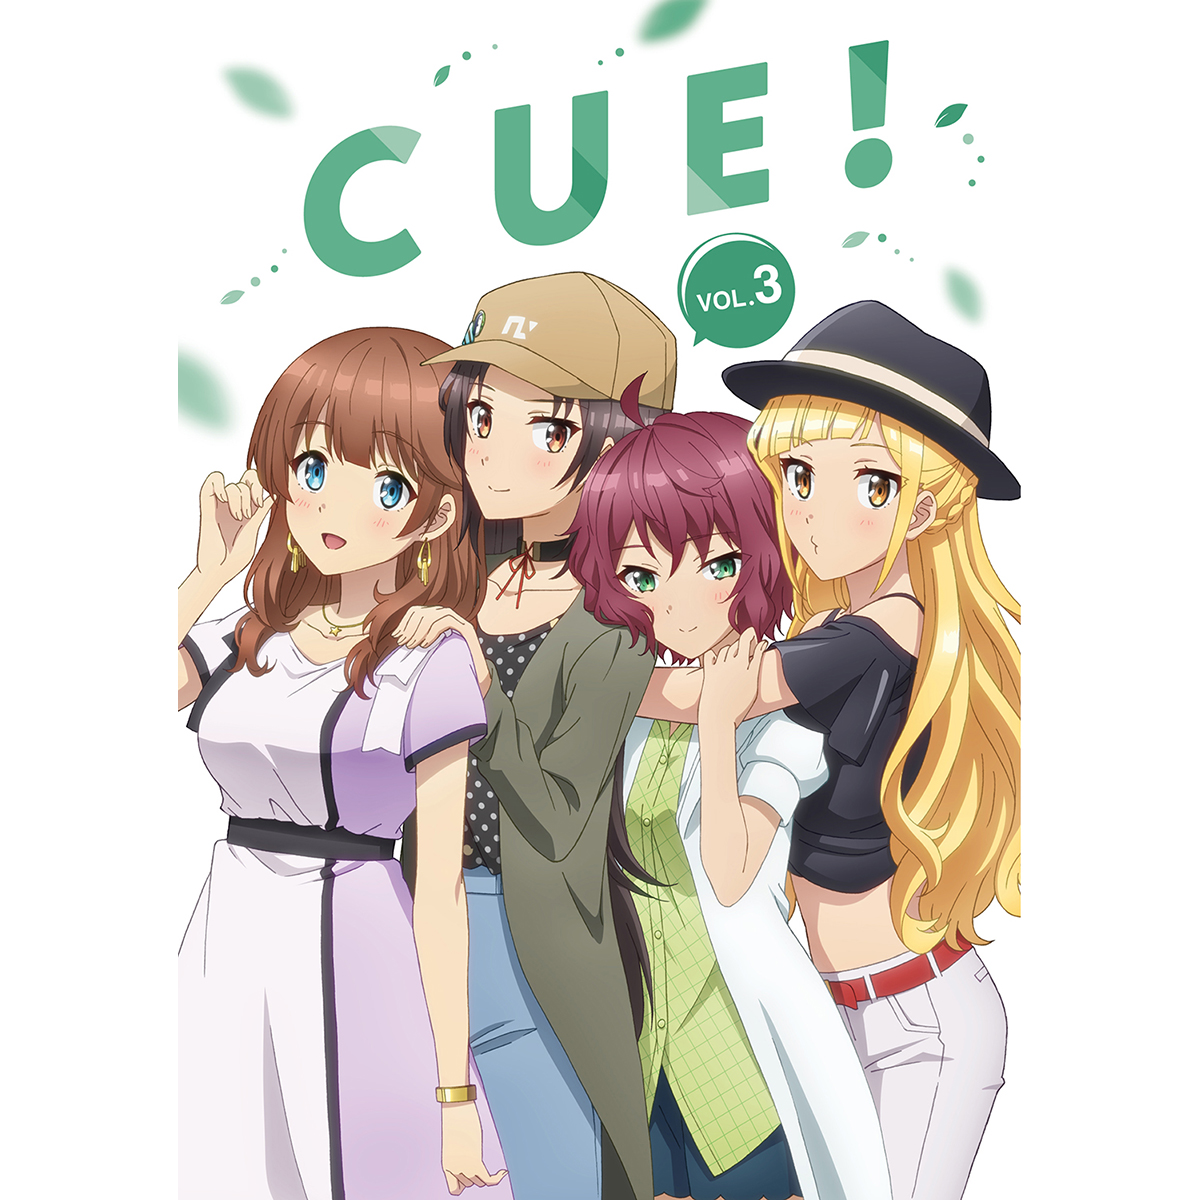 AiRBlUEが「CUE! 3rd Party『Start a new line』」を開催！16人曲全曲を披露したライブのアーカイブは5月8日まで配信中!! - 画像一覧（4/10）